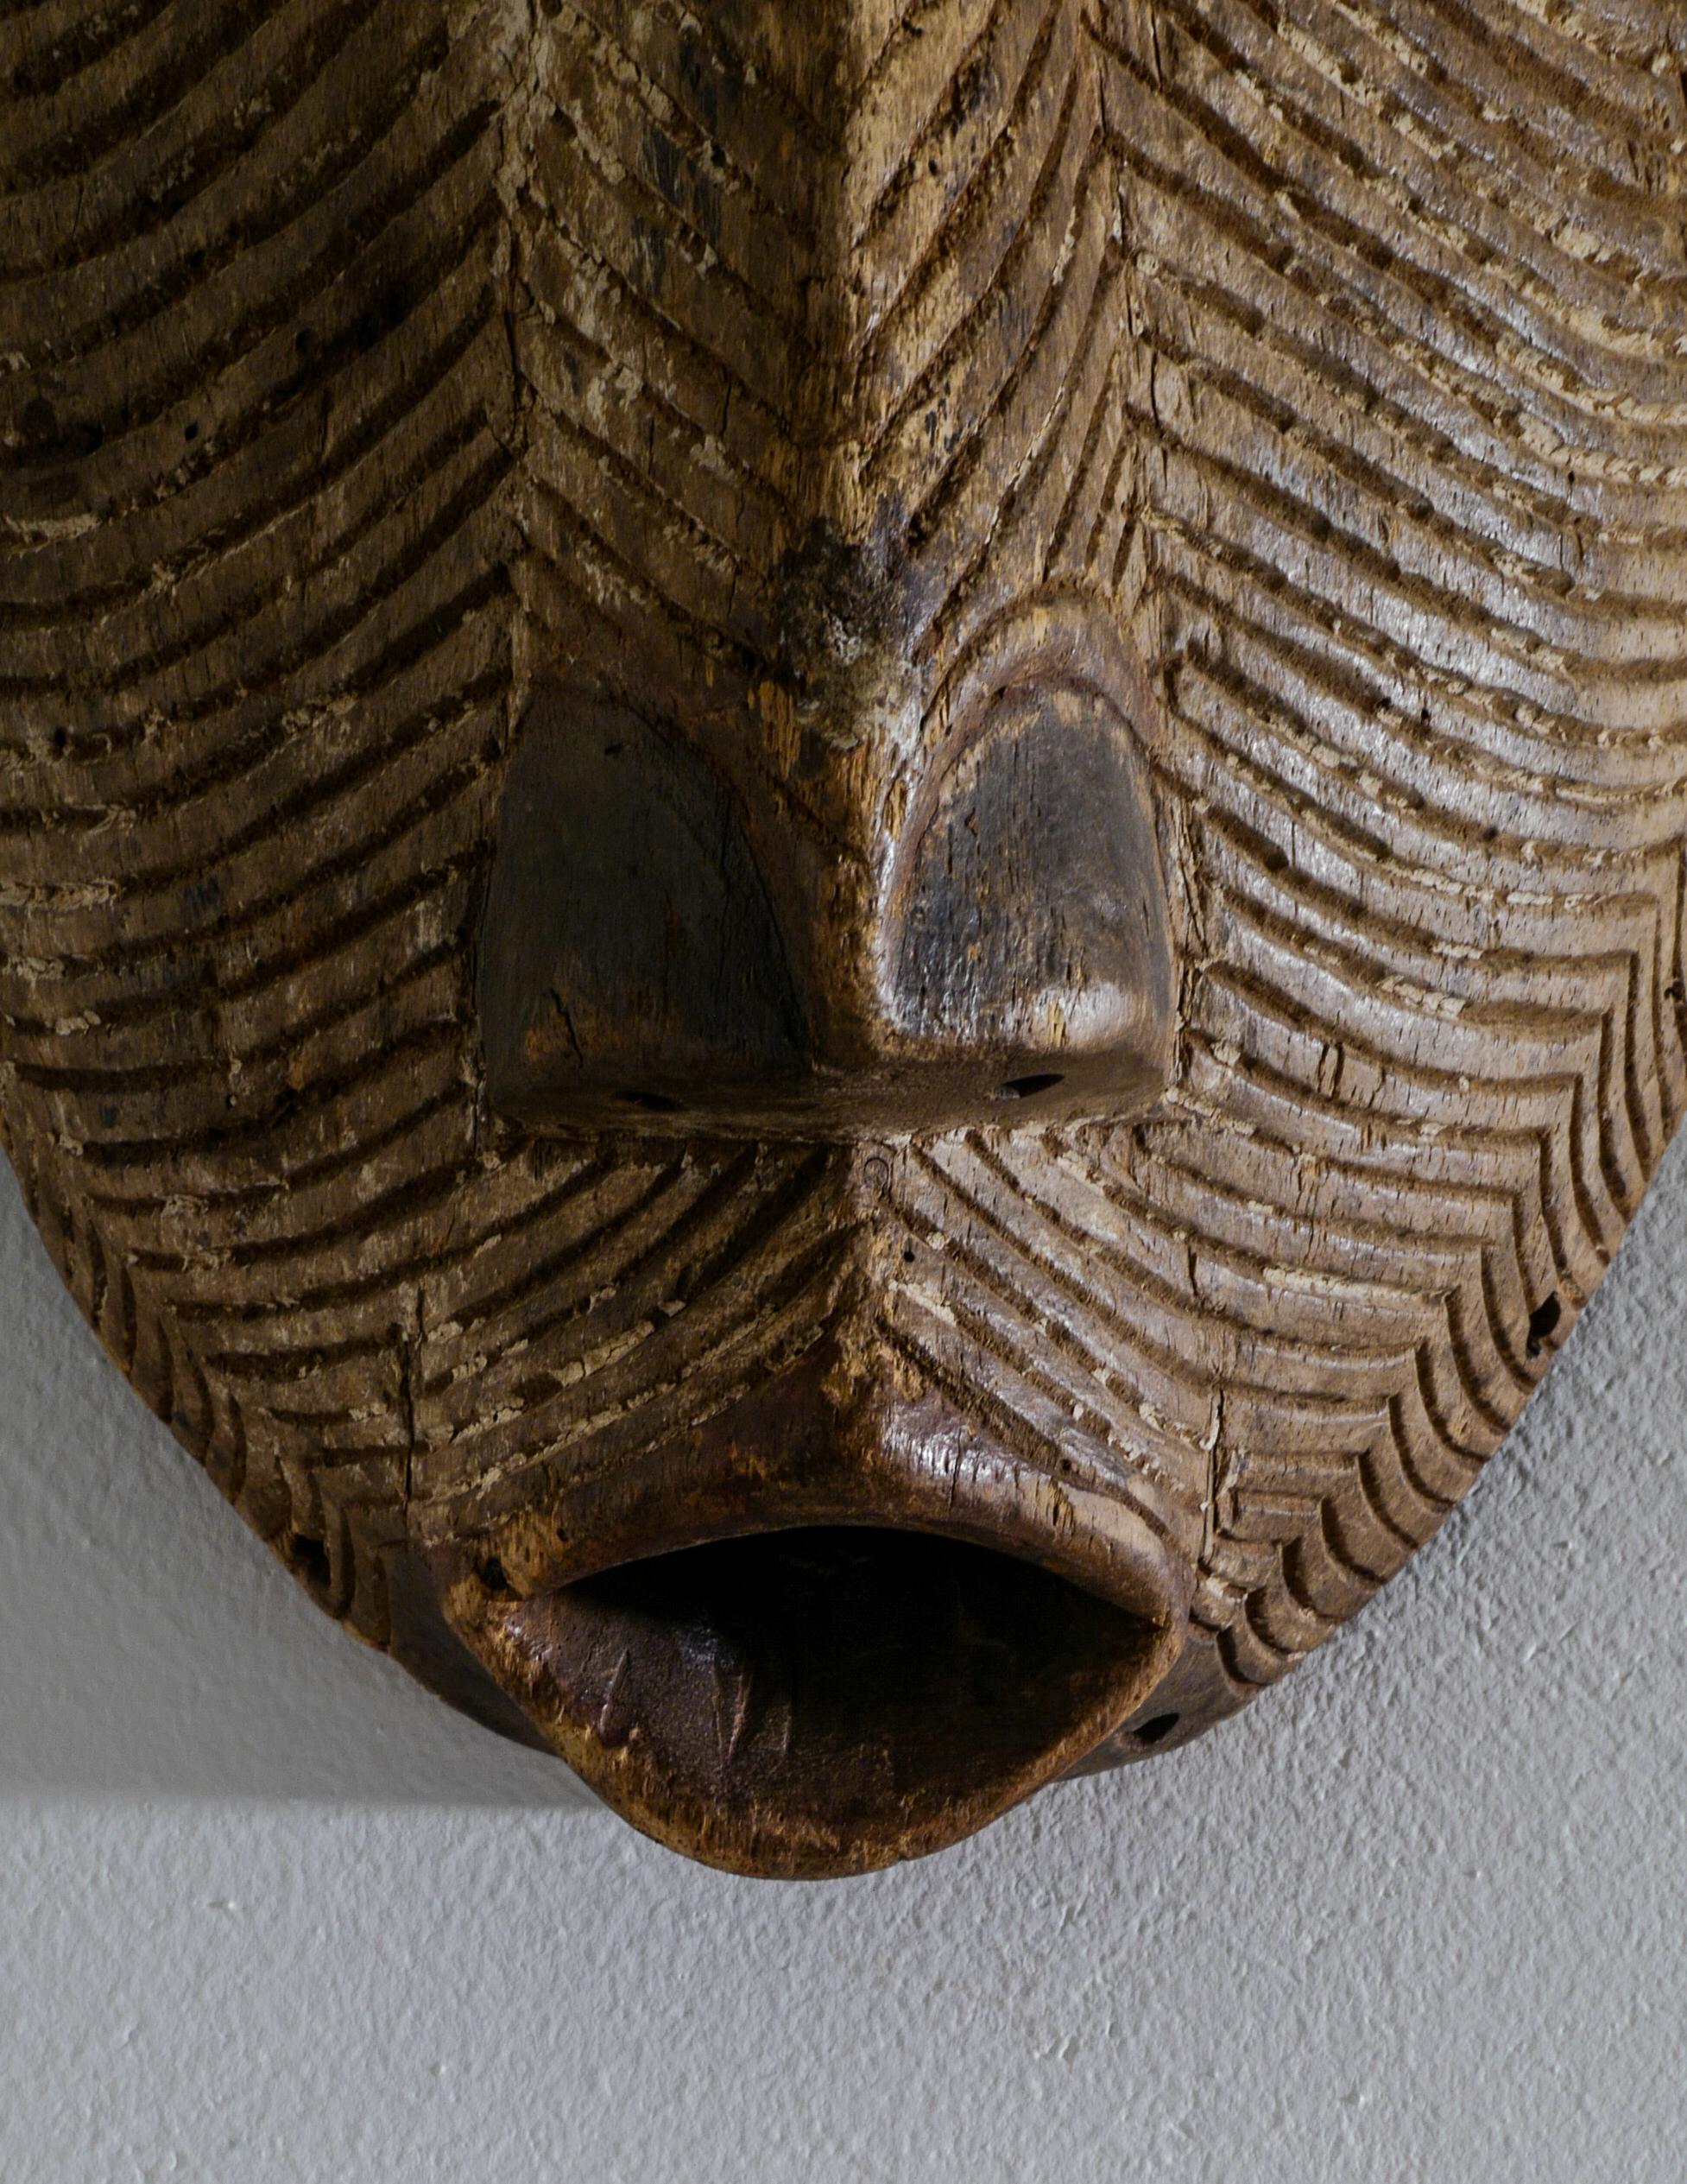 20th Century Tribal Art African Hand Carved Wooden Mask Kenya, 1900s